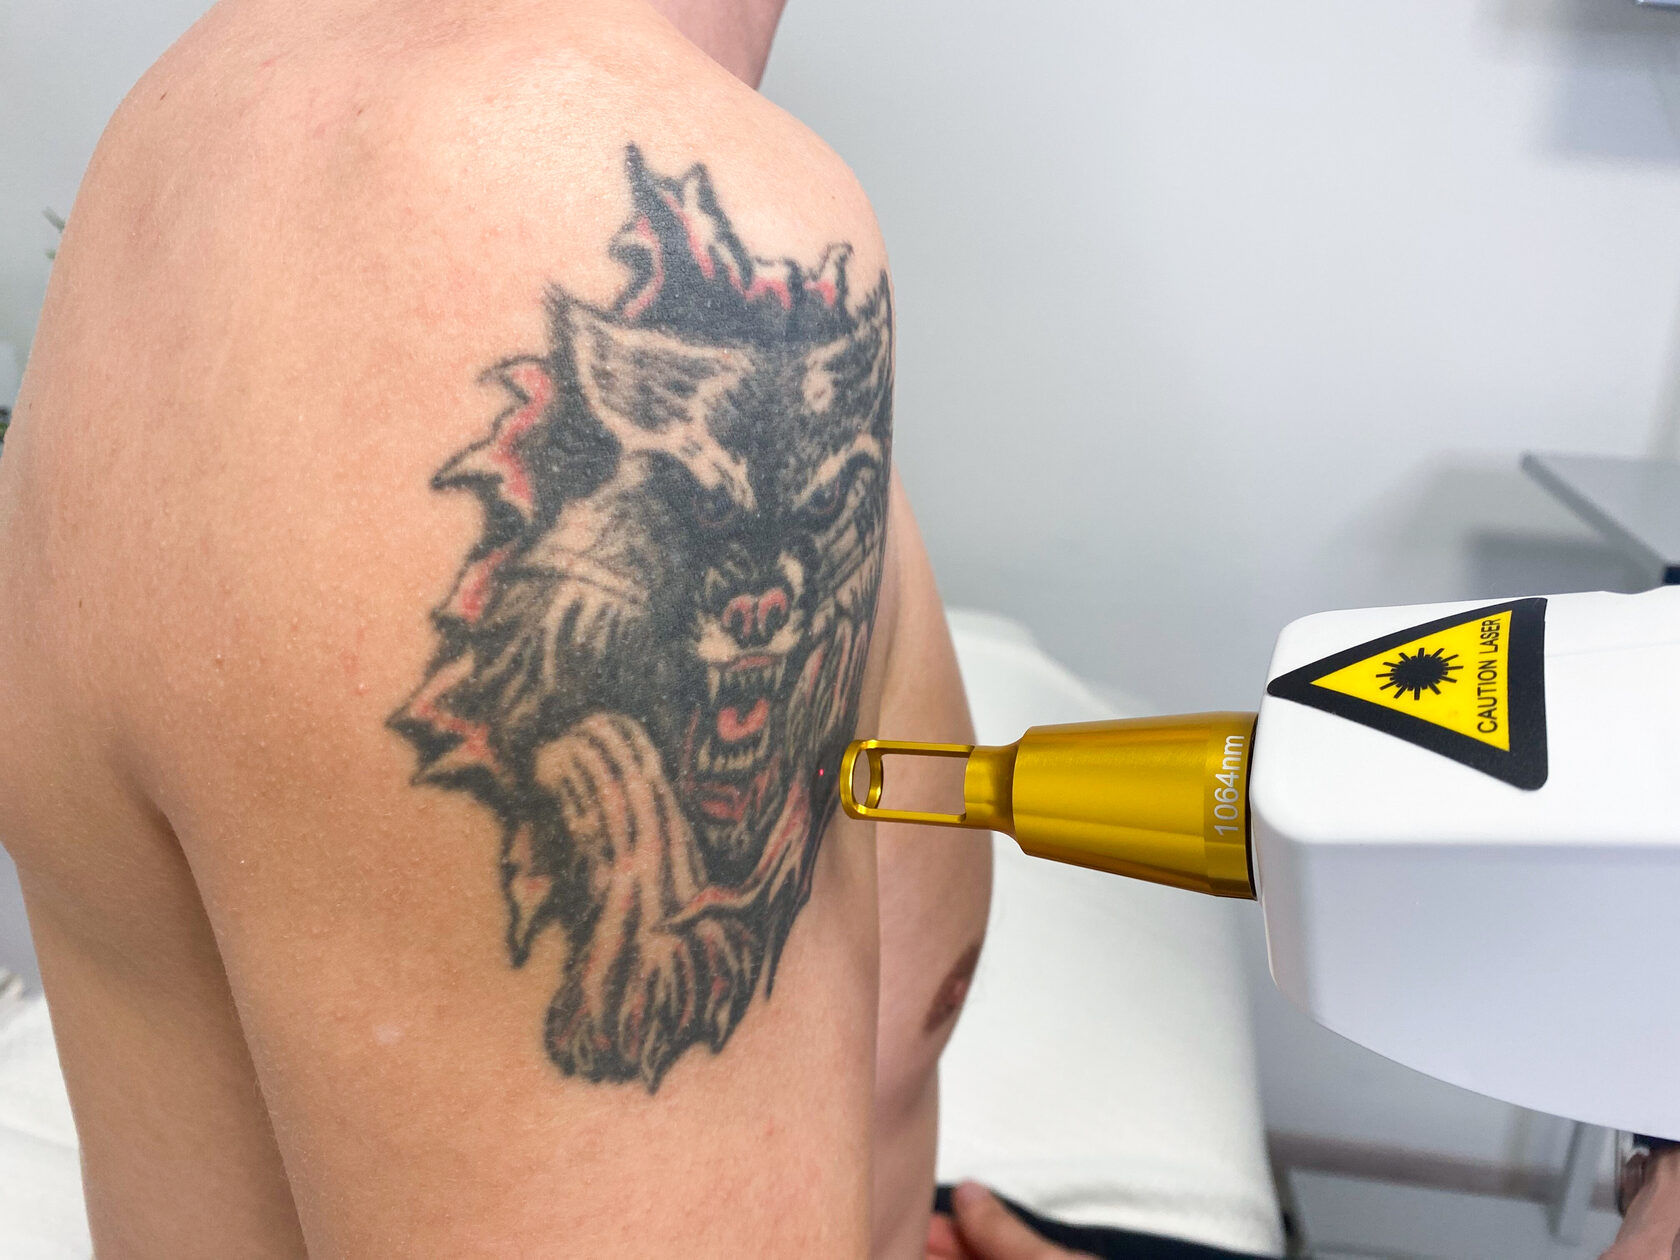 Best laser tattoo removal machines in 2021!